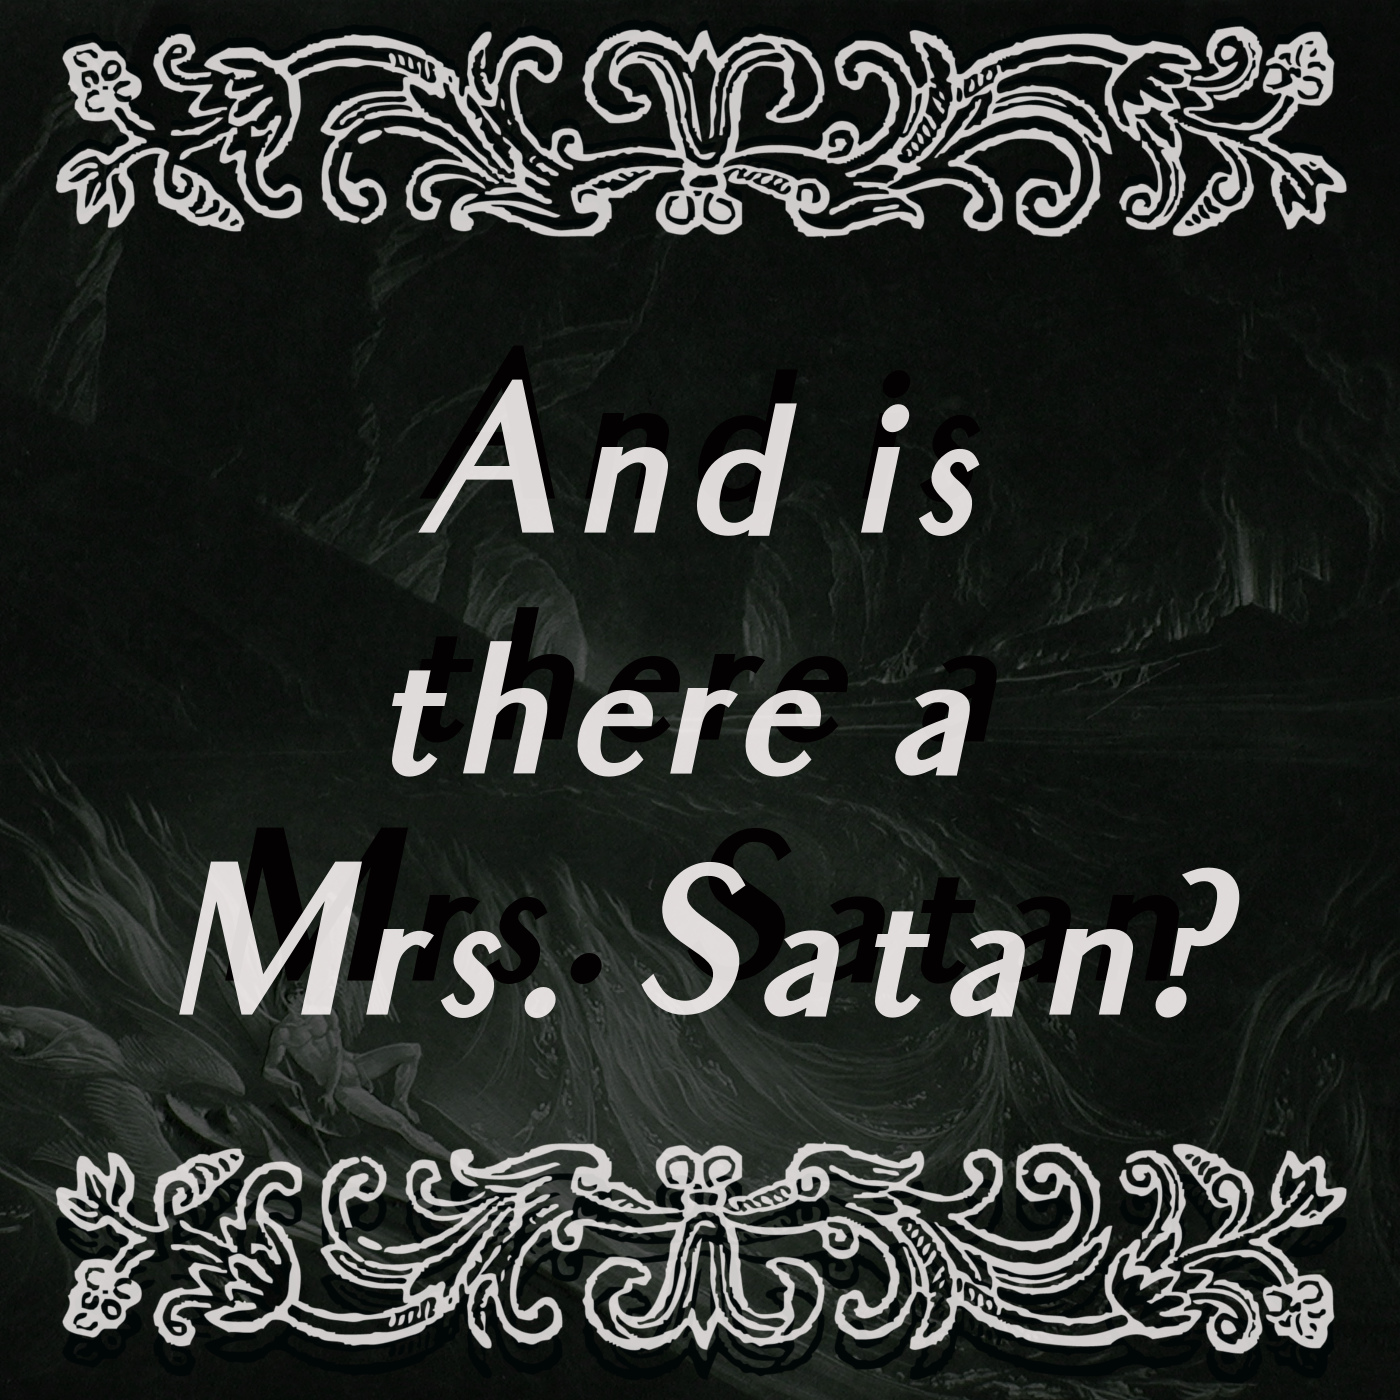 Episode Two: And is there a Mrs. Satan?